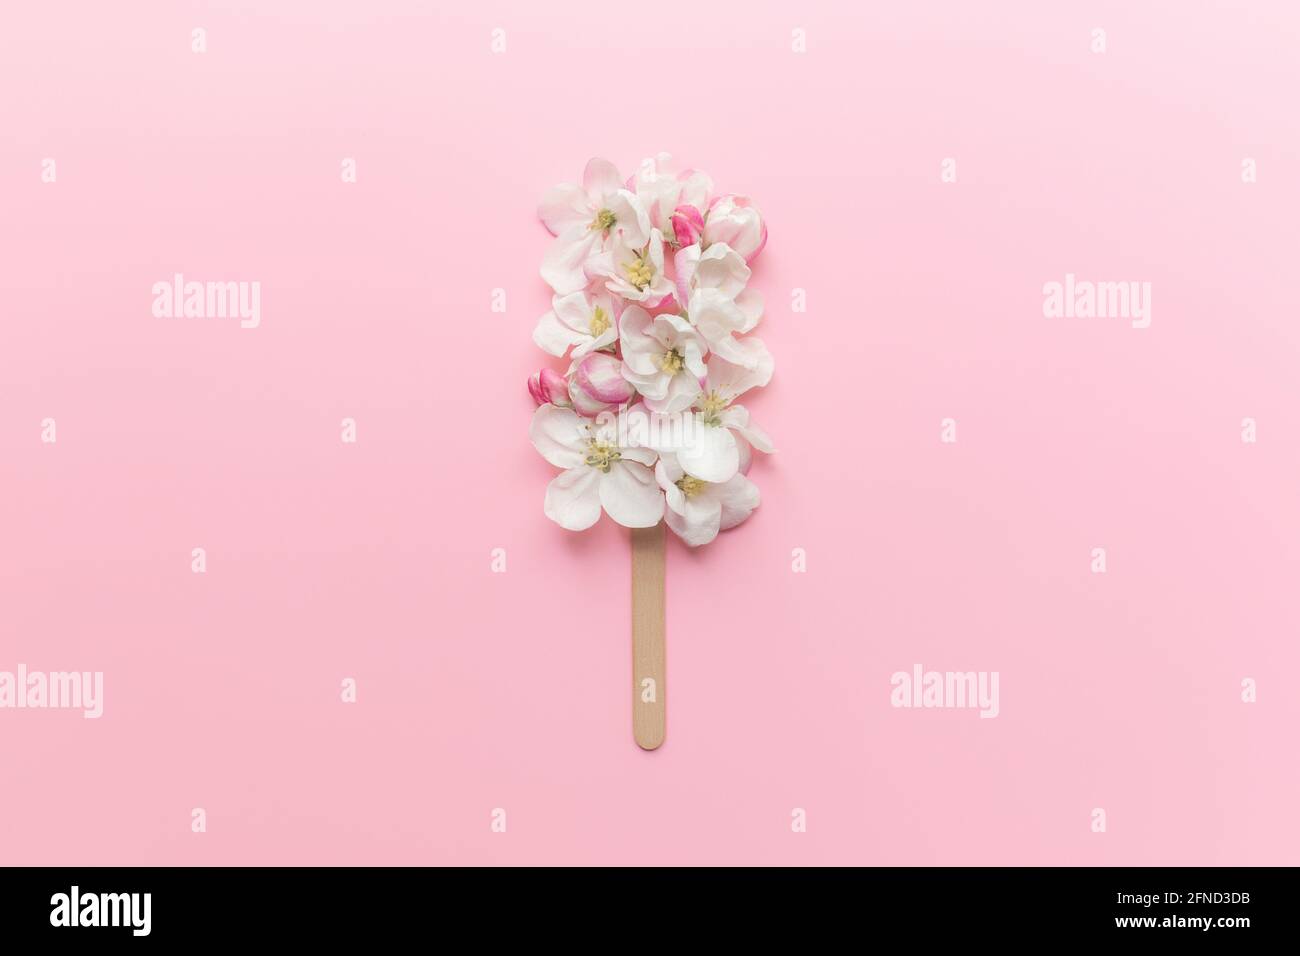 Flat lay on pink background with apple blossom ice cream lolly on a stick Stock Photo